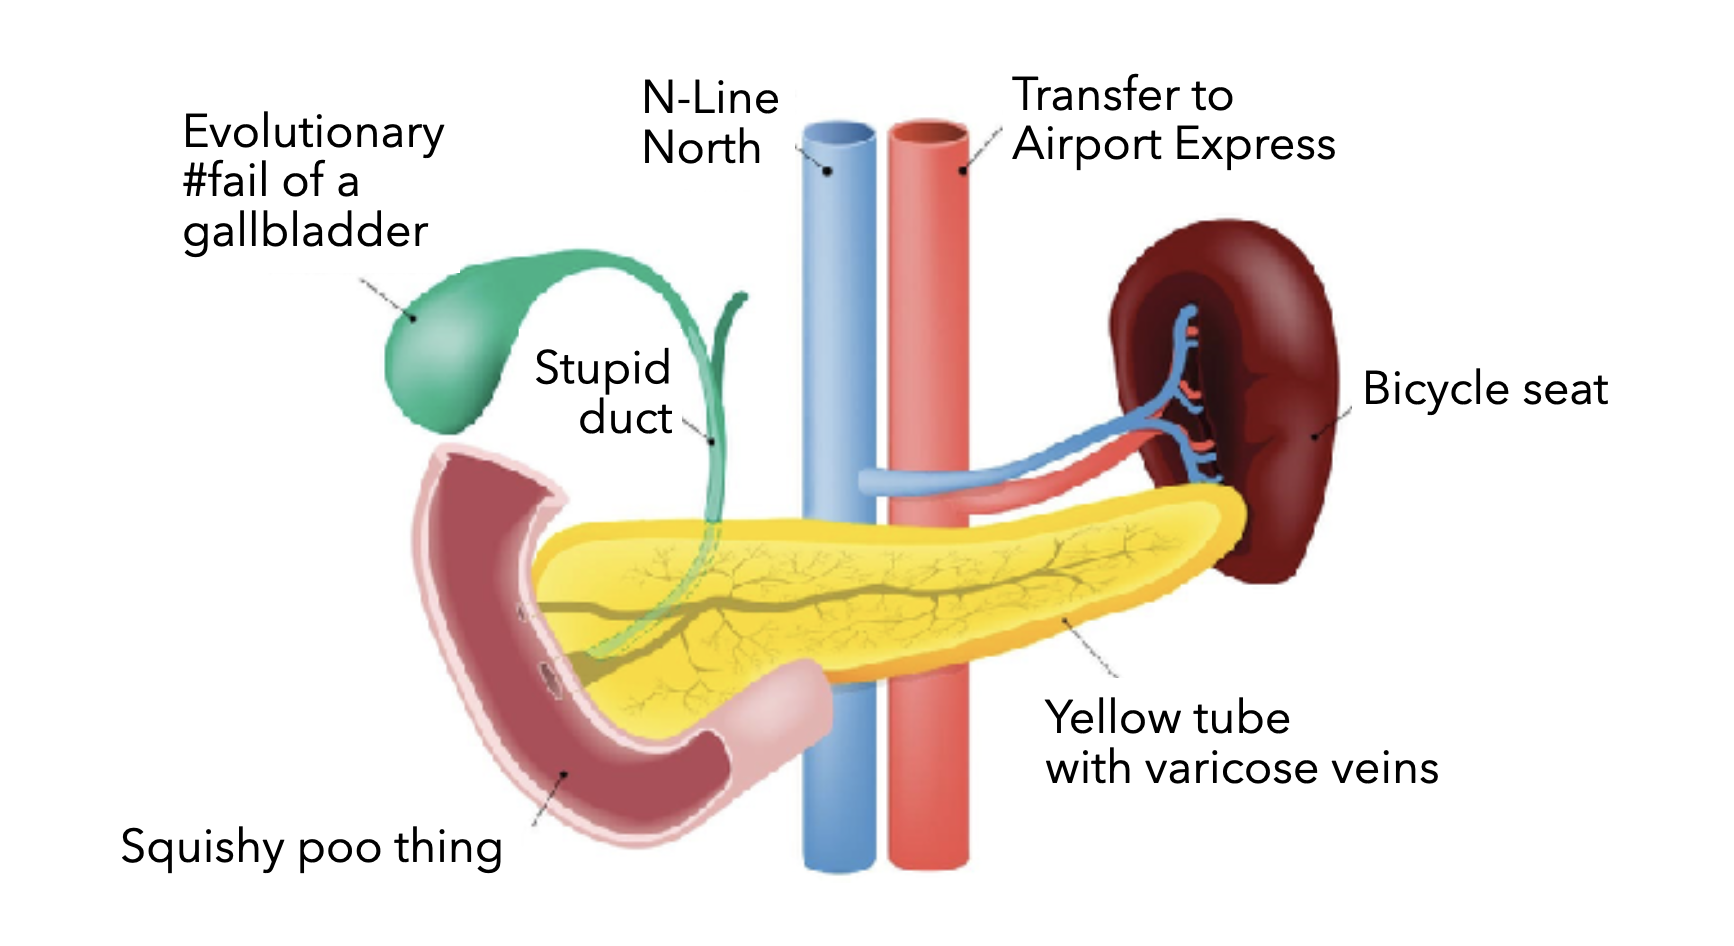 Drawing of the gastric system, with callouts indicating ‘Evolutionary fail of a gallbladder’, ‘Stupid duct’, ‘Squishy poo thing’, ‘Bicycle seat’, and ‘Yellow tube with varicose veins’.